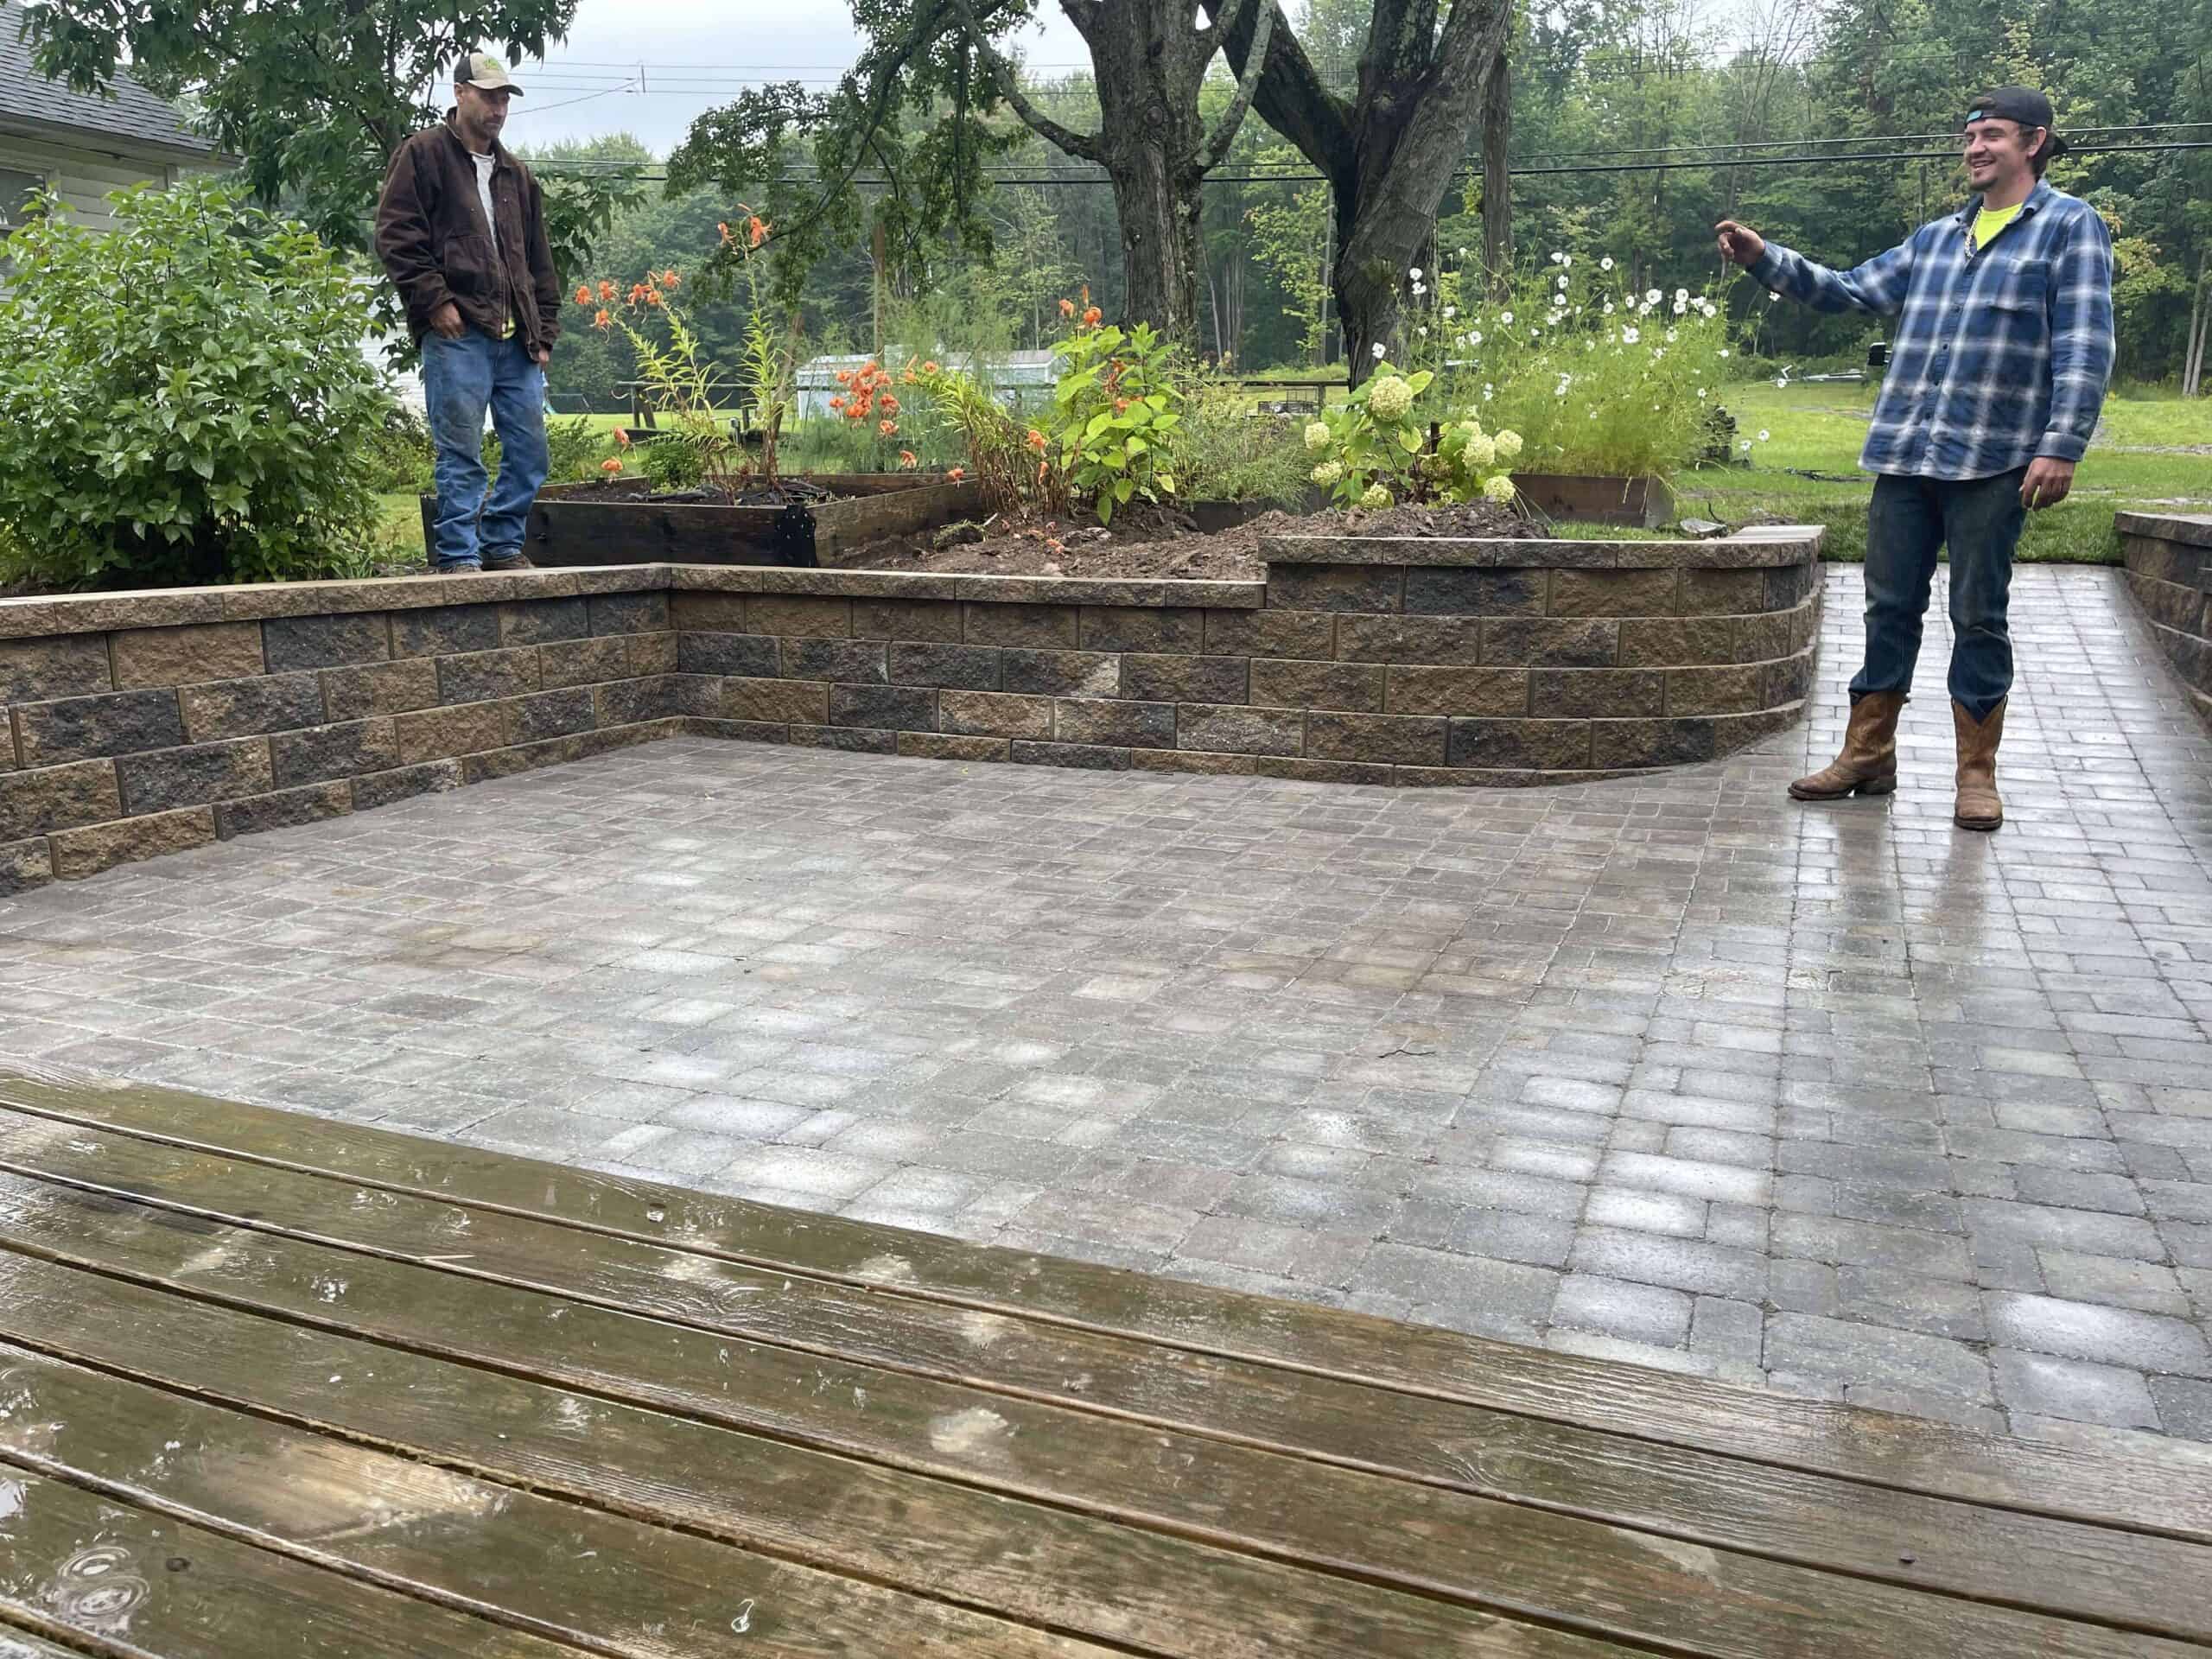 Hardscaping in NY requires a seasonal maintenance approach for year-round sustainability